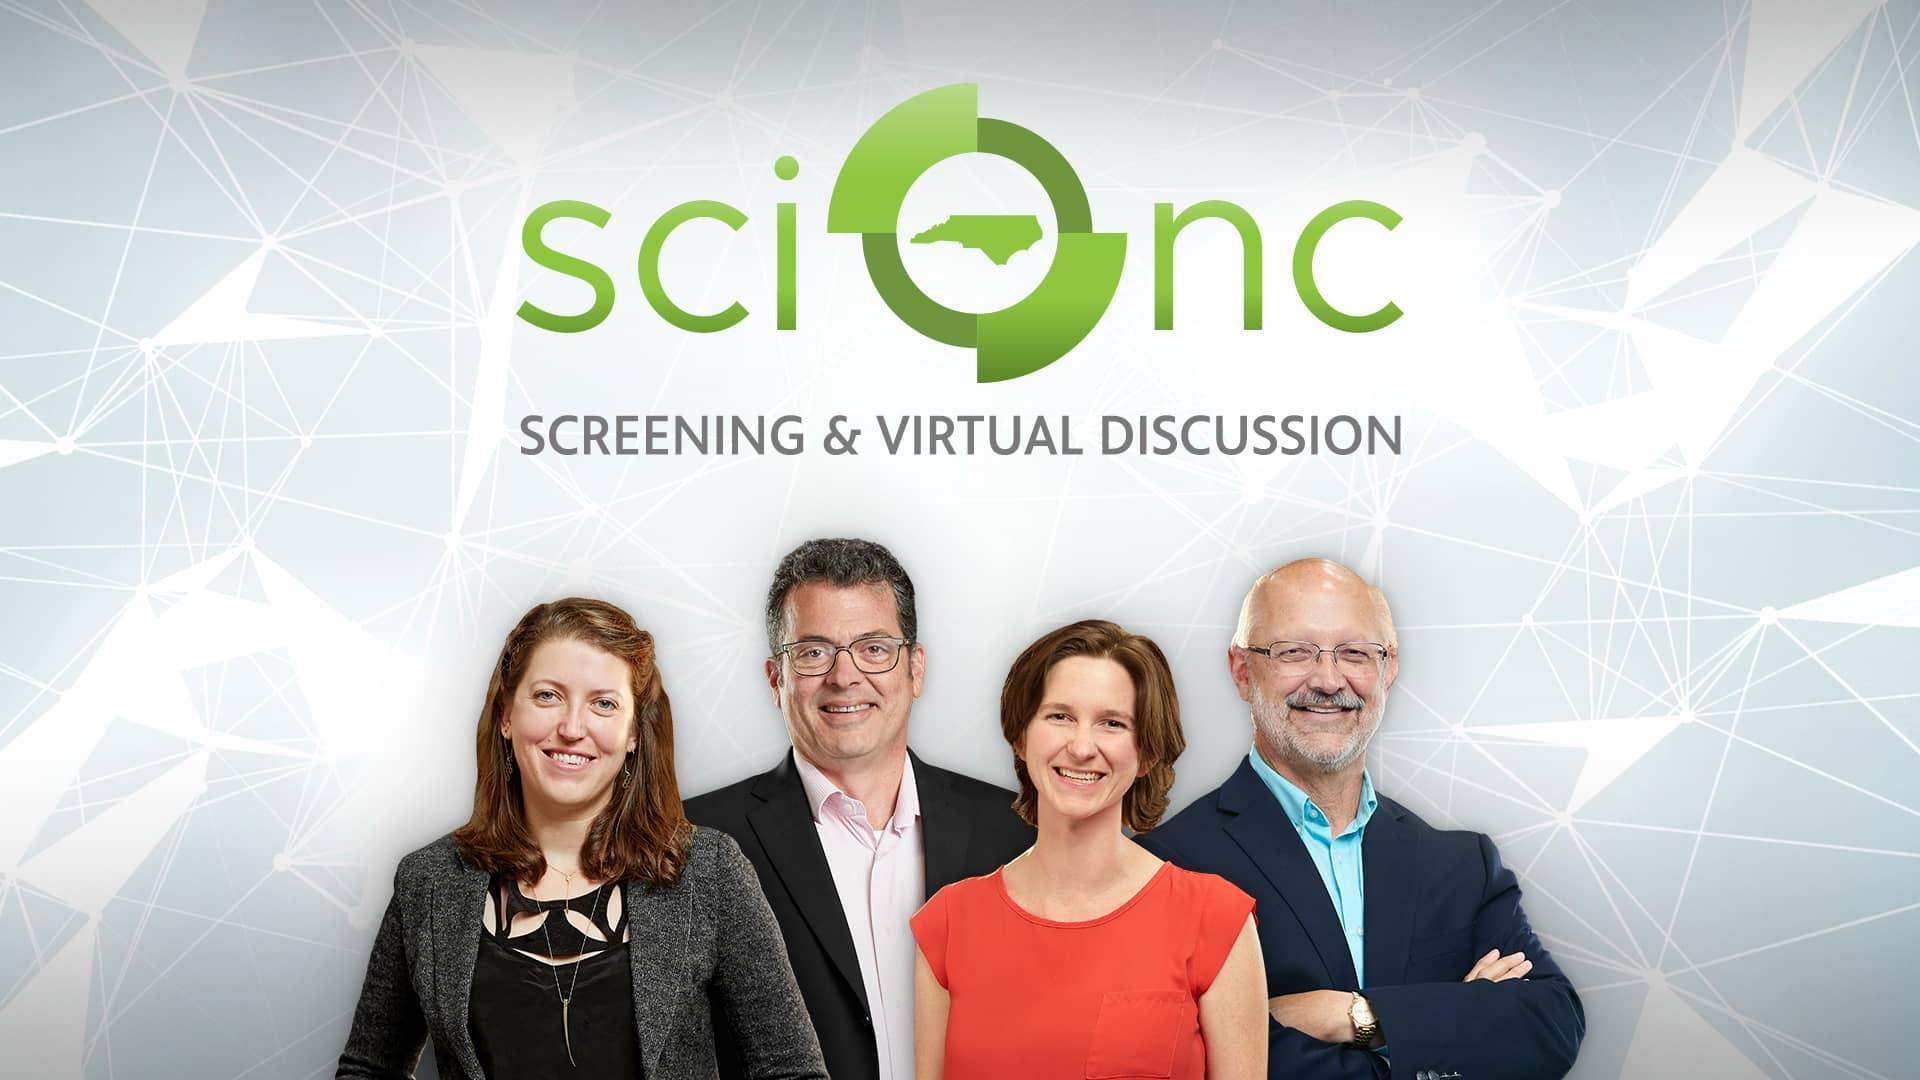 From top to bottom: Sci NC logo in green, "SCREENING & VIRTUAL DISCUSSION" in grey and then pictured from left to right are the Sci NC producers, Michelle Lotker, Evan Howell, Rossie Izlar and Frank Graff.